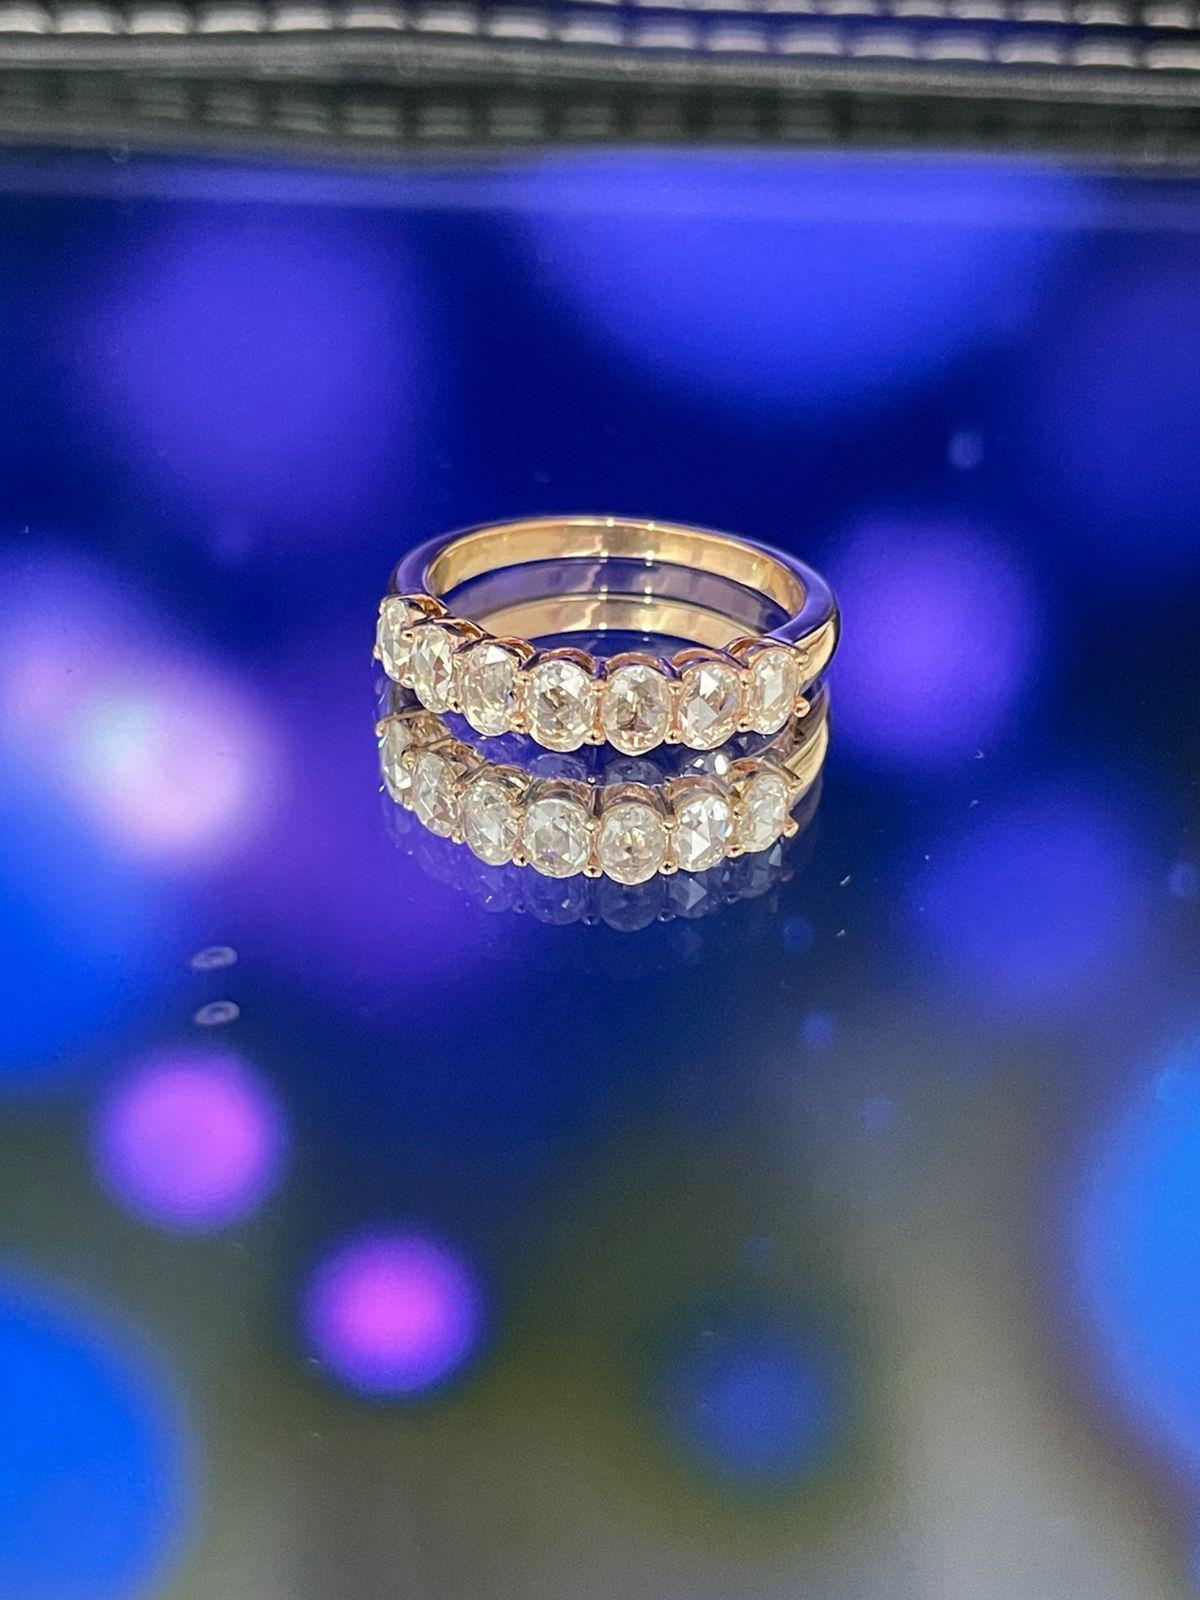 PANIM Oval Rosecut Diamond Band Ring in 18 Karat White Gold / Rose Gold

A classic engagement ring.

Style available in different price ranges. Prices are based on your selection. Please contact us for more information.

Details -
- 18K White Gold /